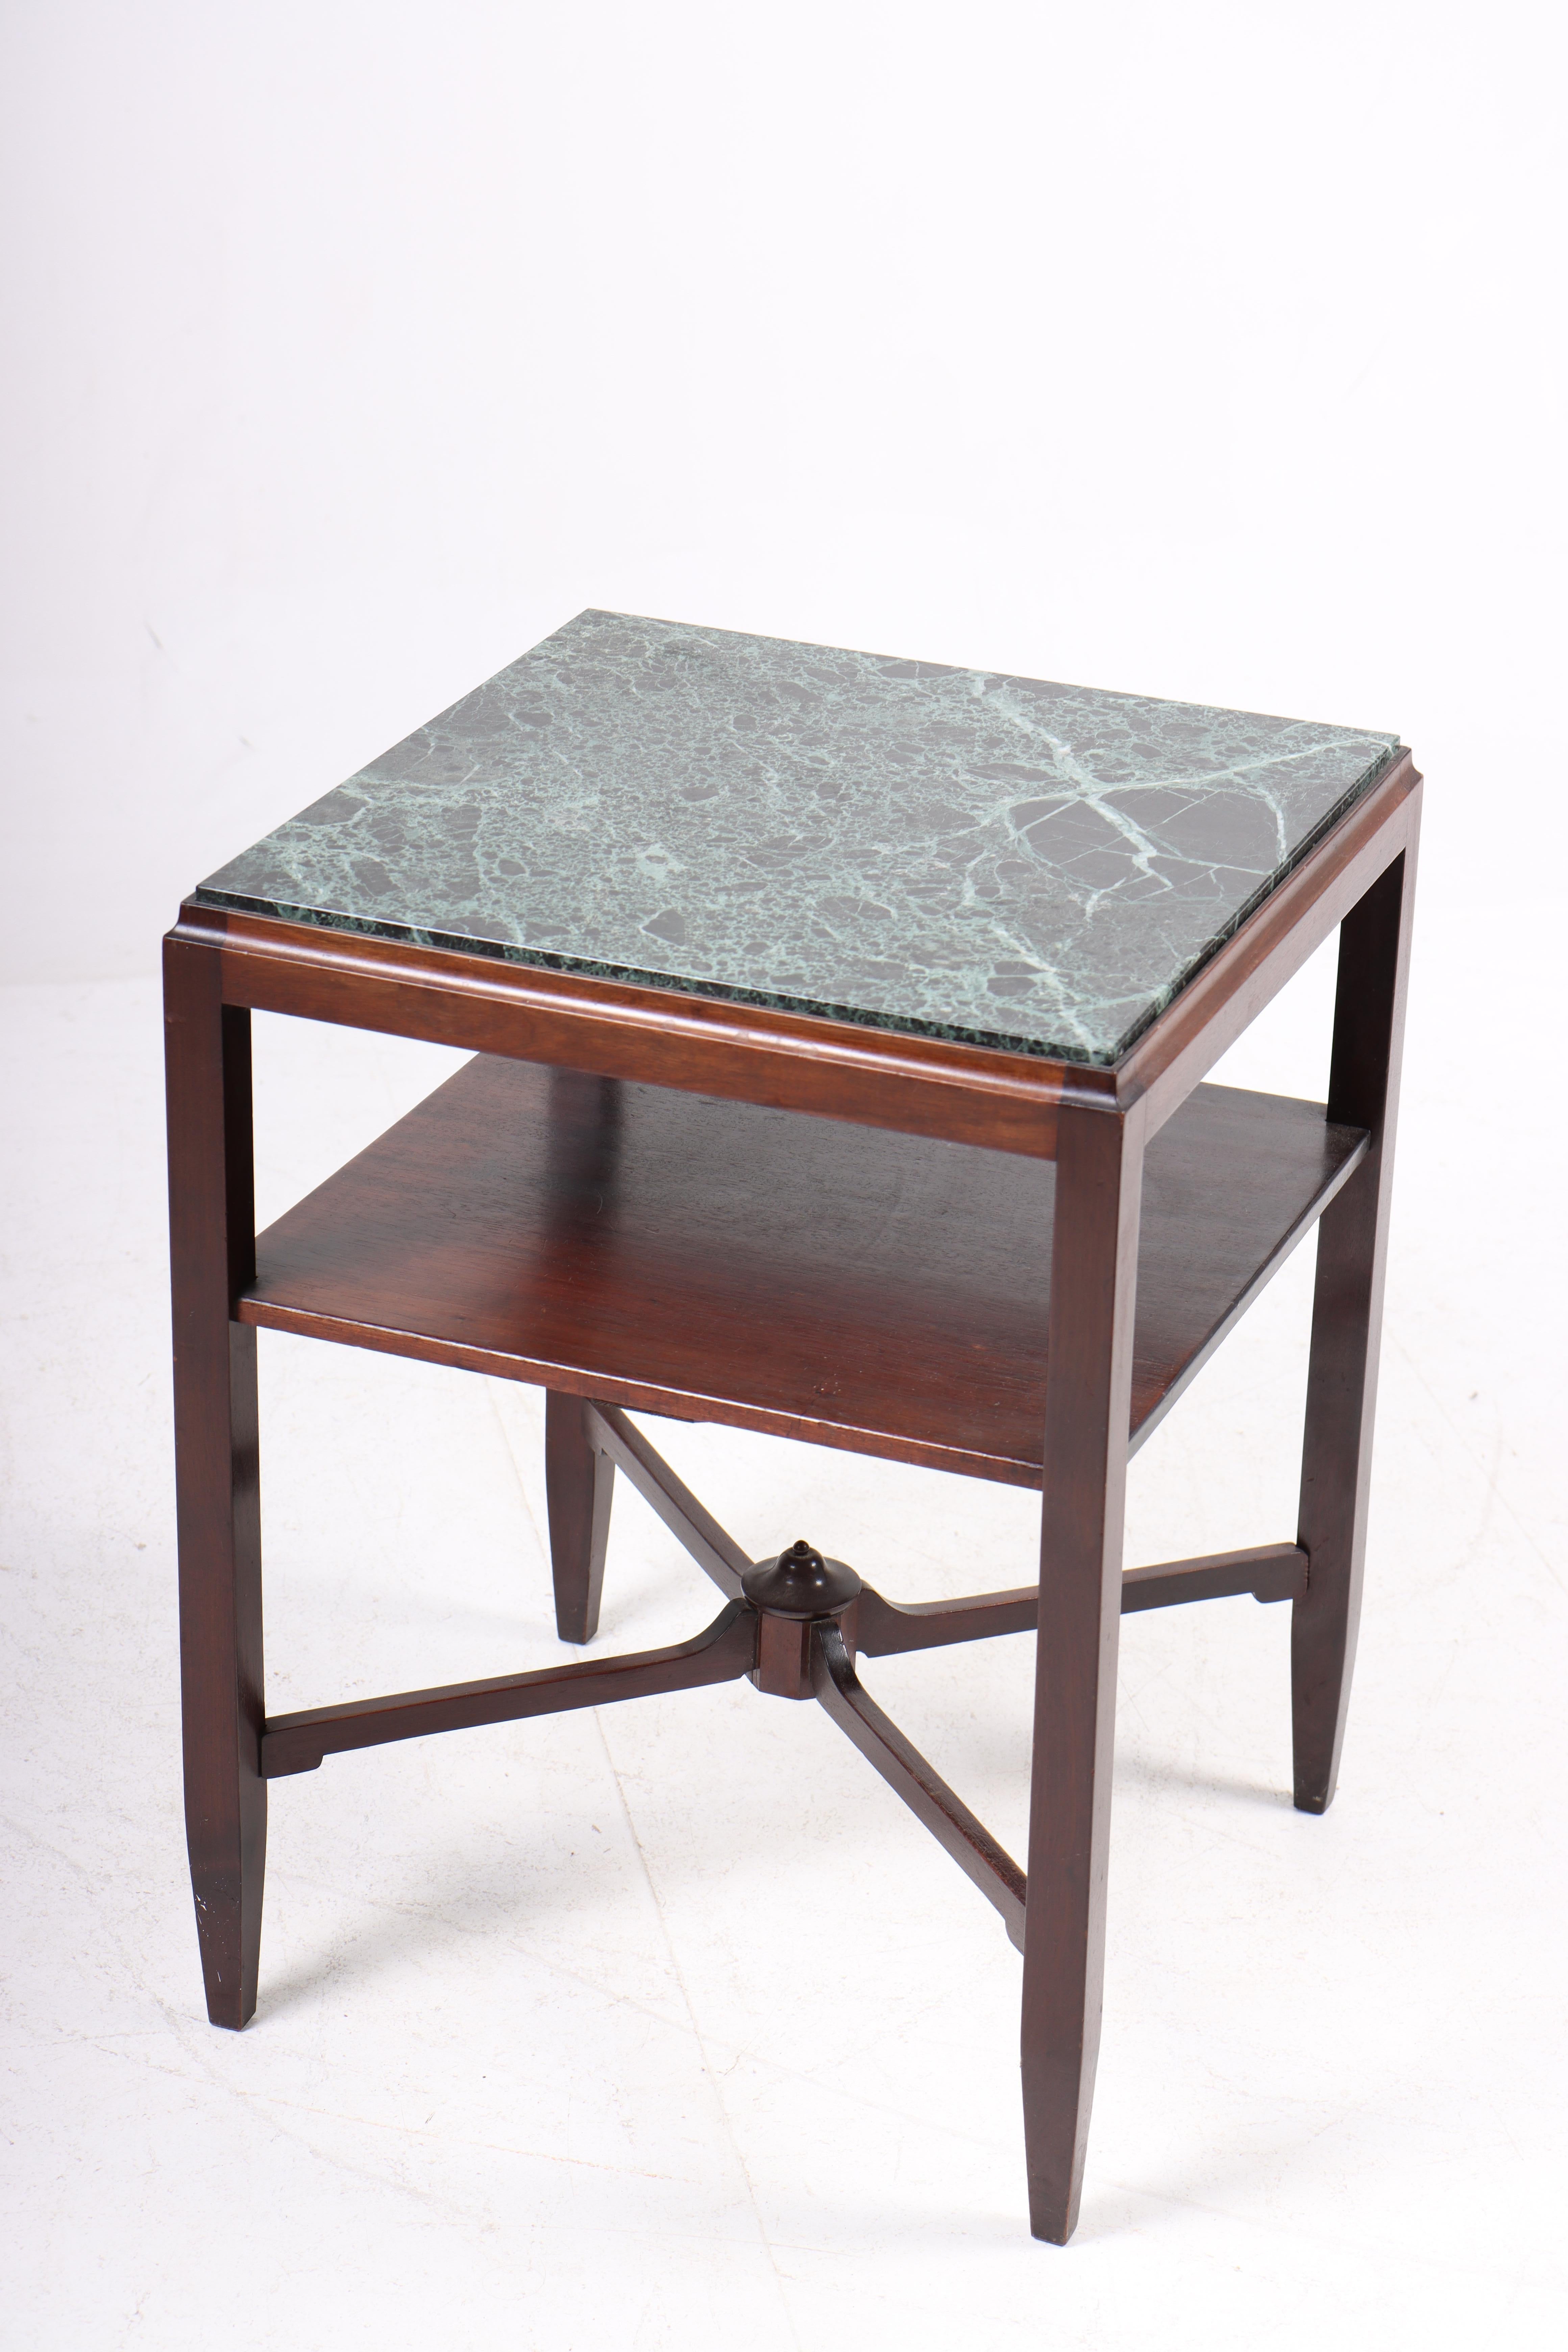 Low Table in Mahogany and Marble, Made in Denmark, 1930s For Sale 3